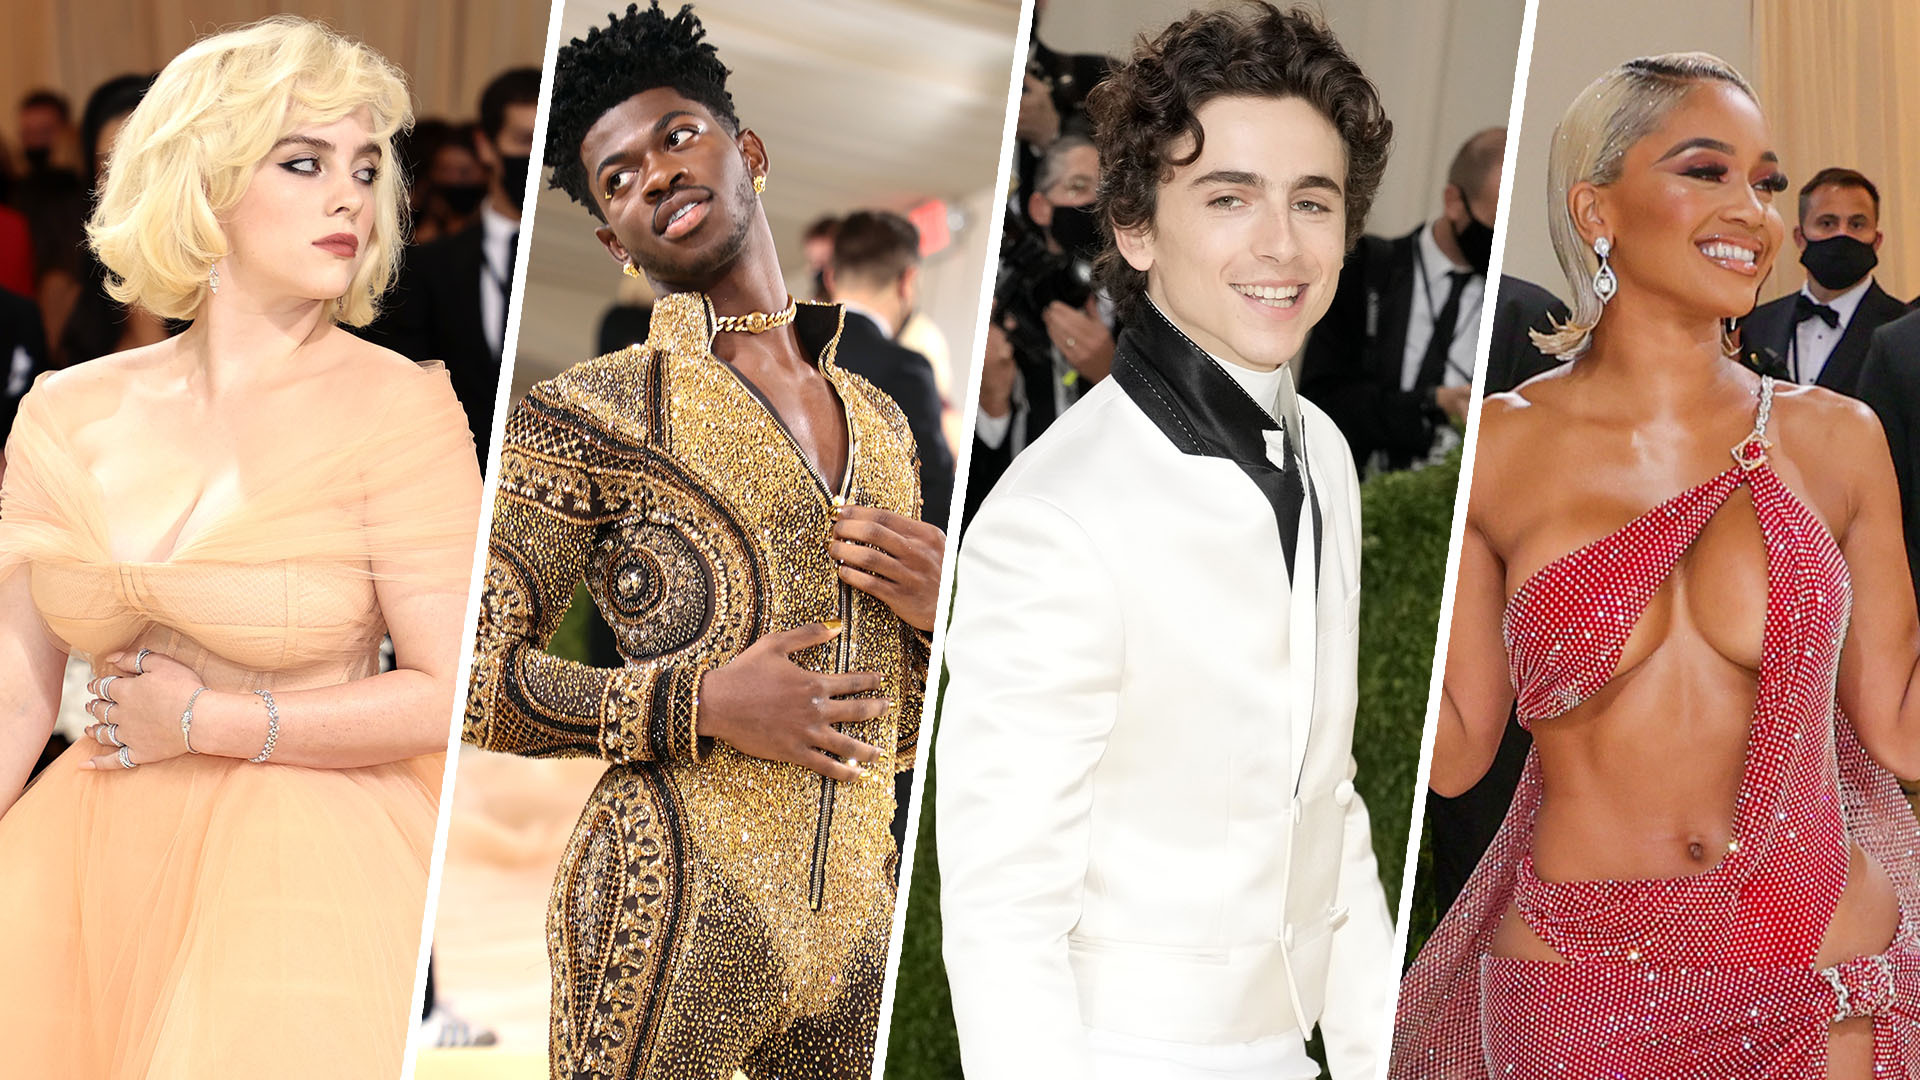 Met Gala 2022: Theme, Dress Code, Who's Hosting and More – NBC New York